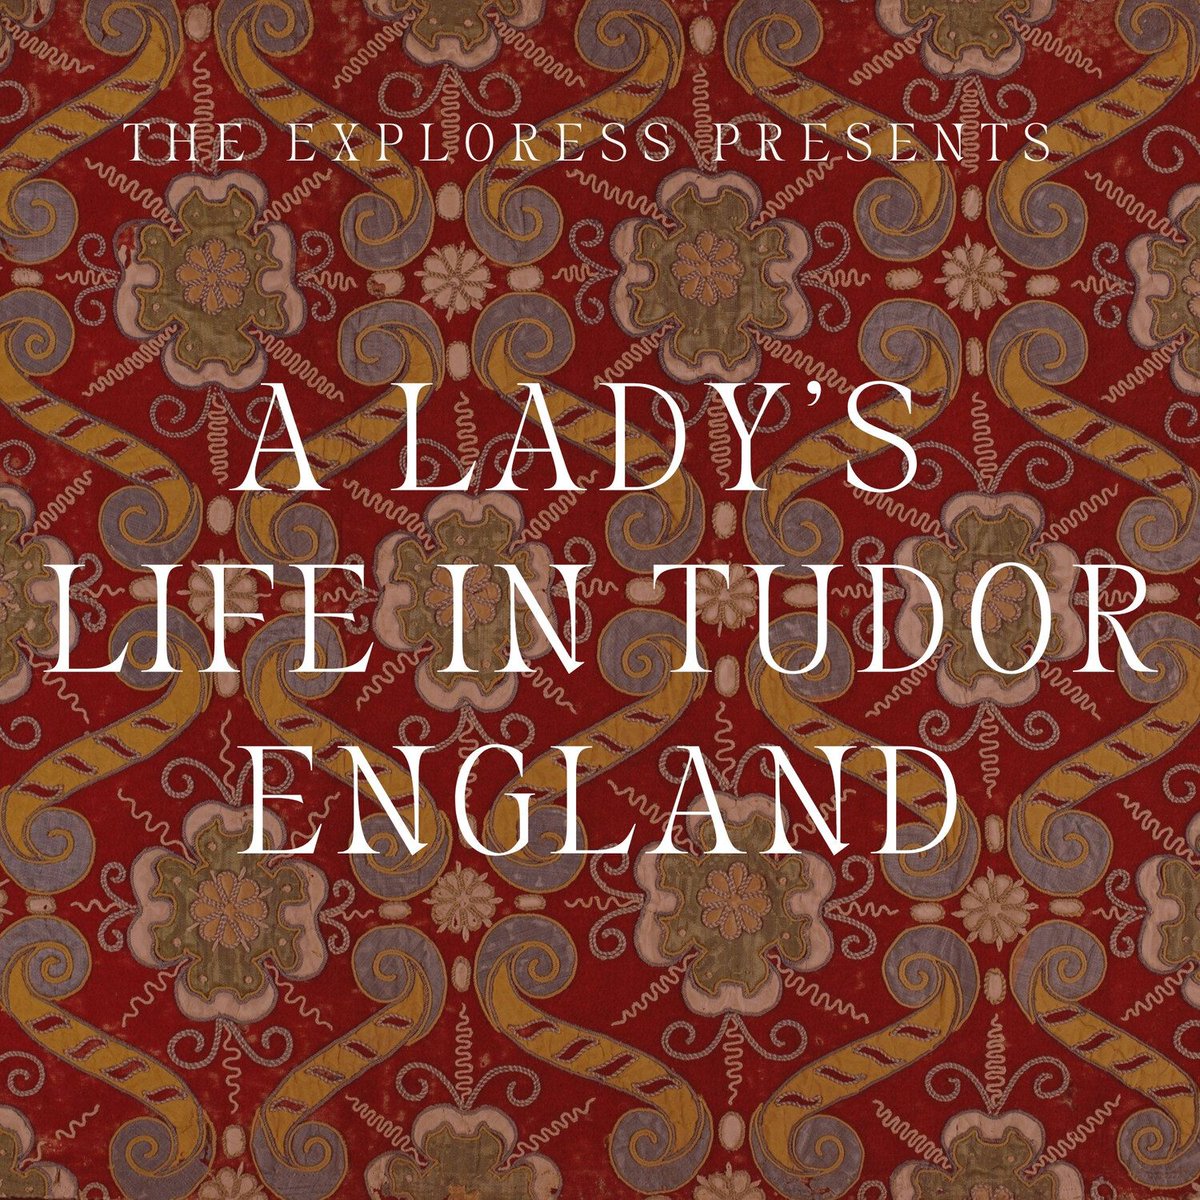 The first three chapters of our time travels back to Tudor England are lined up and ready to slide into your ears! buff.ly/3socbJQ